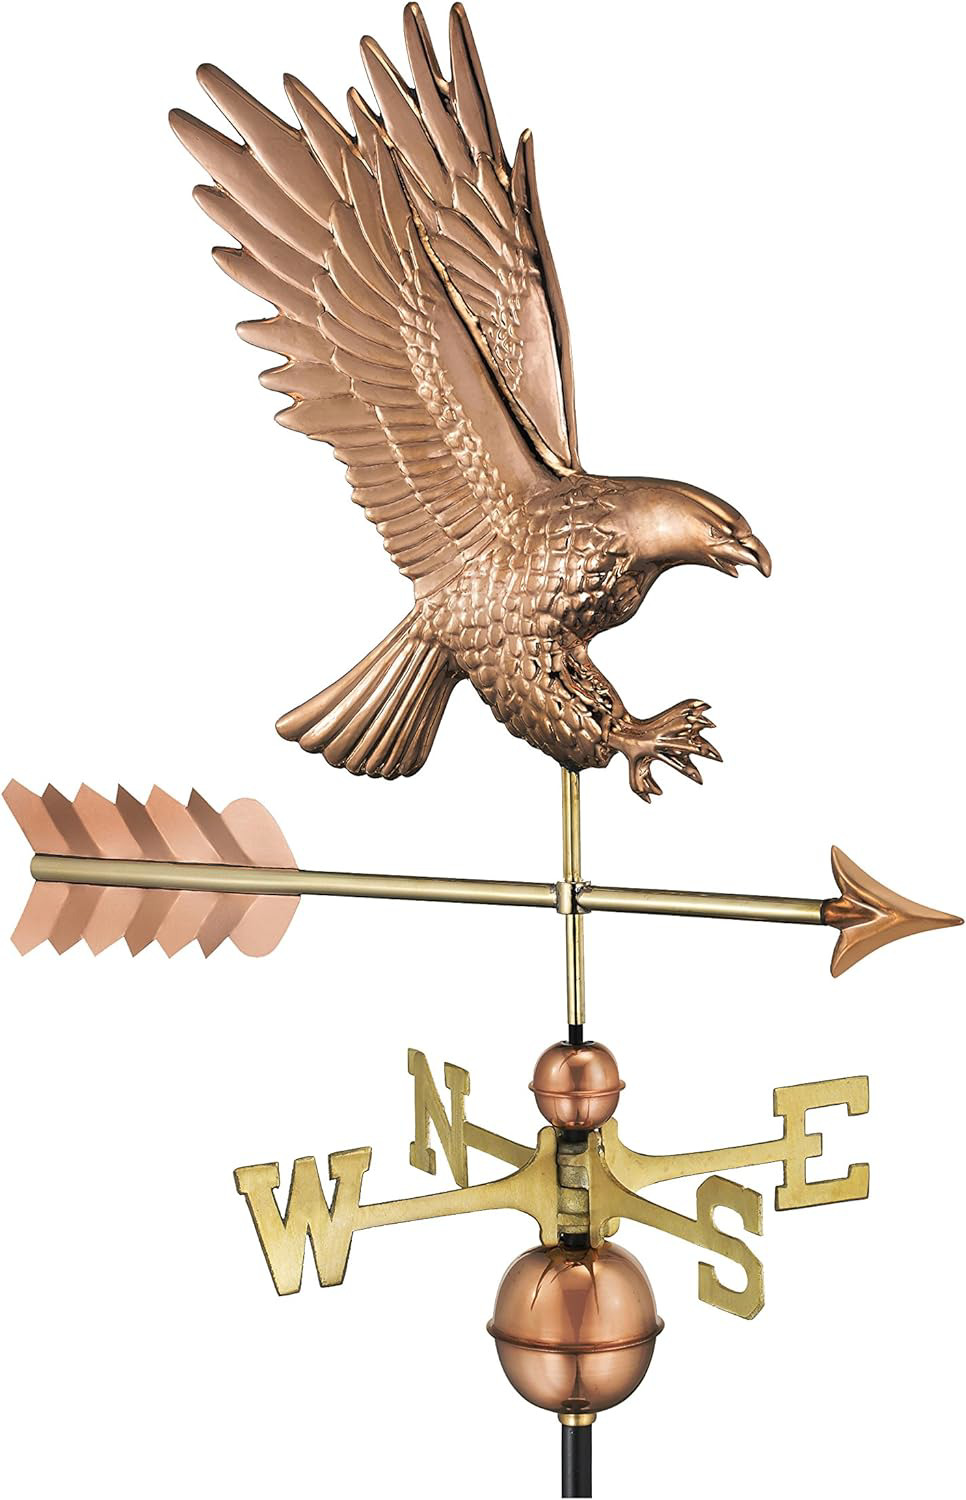 Good Directions 1969P American Bald Eagle Copper Weathervane,Polished Copper